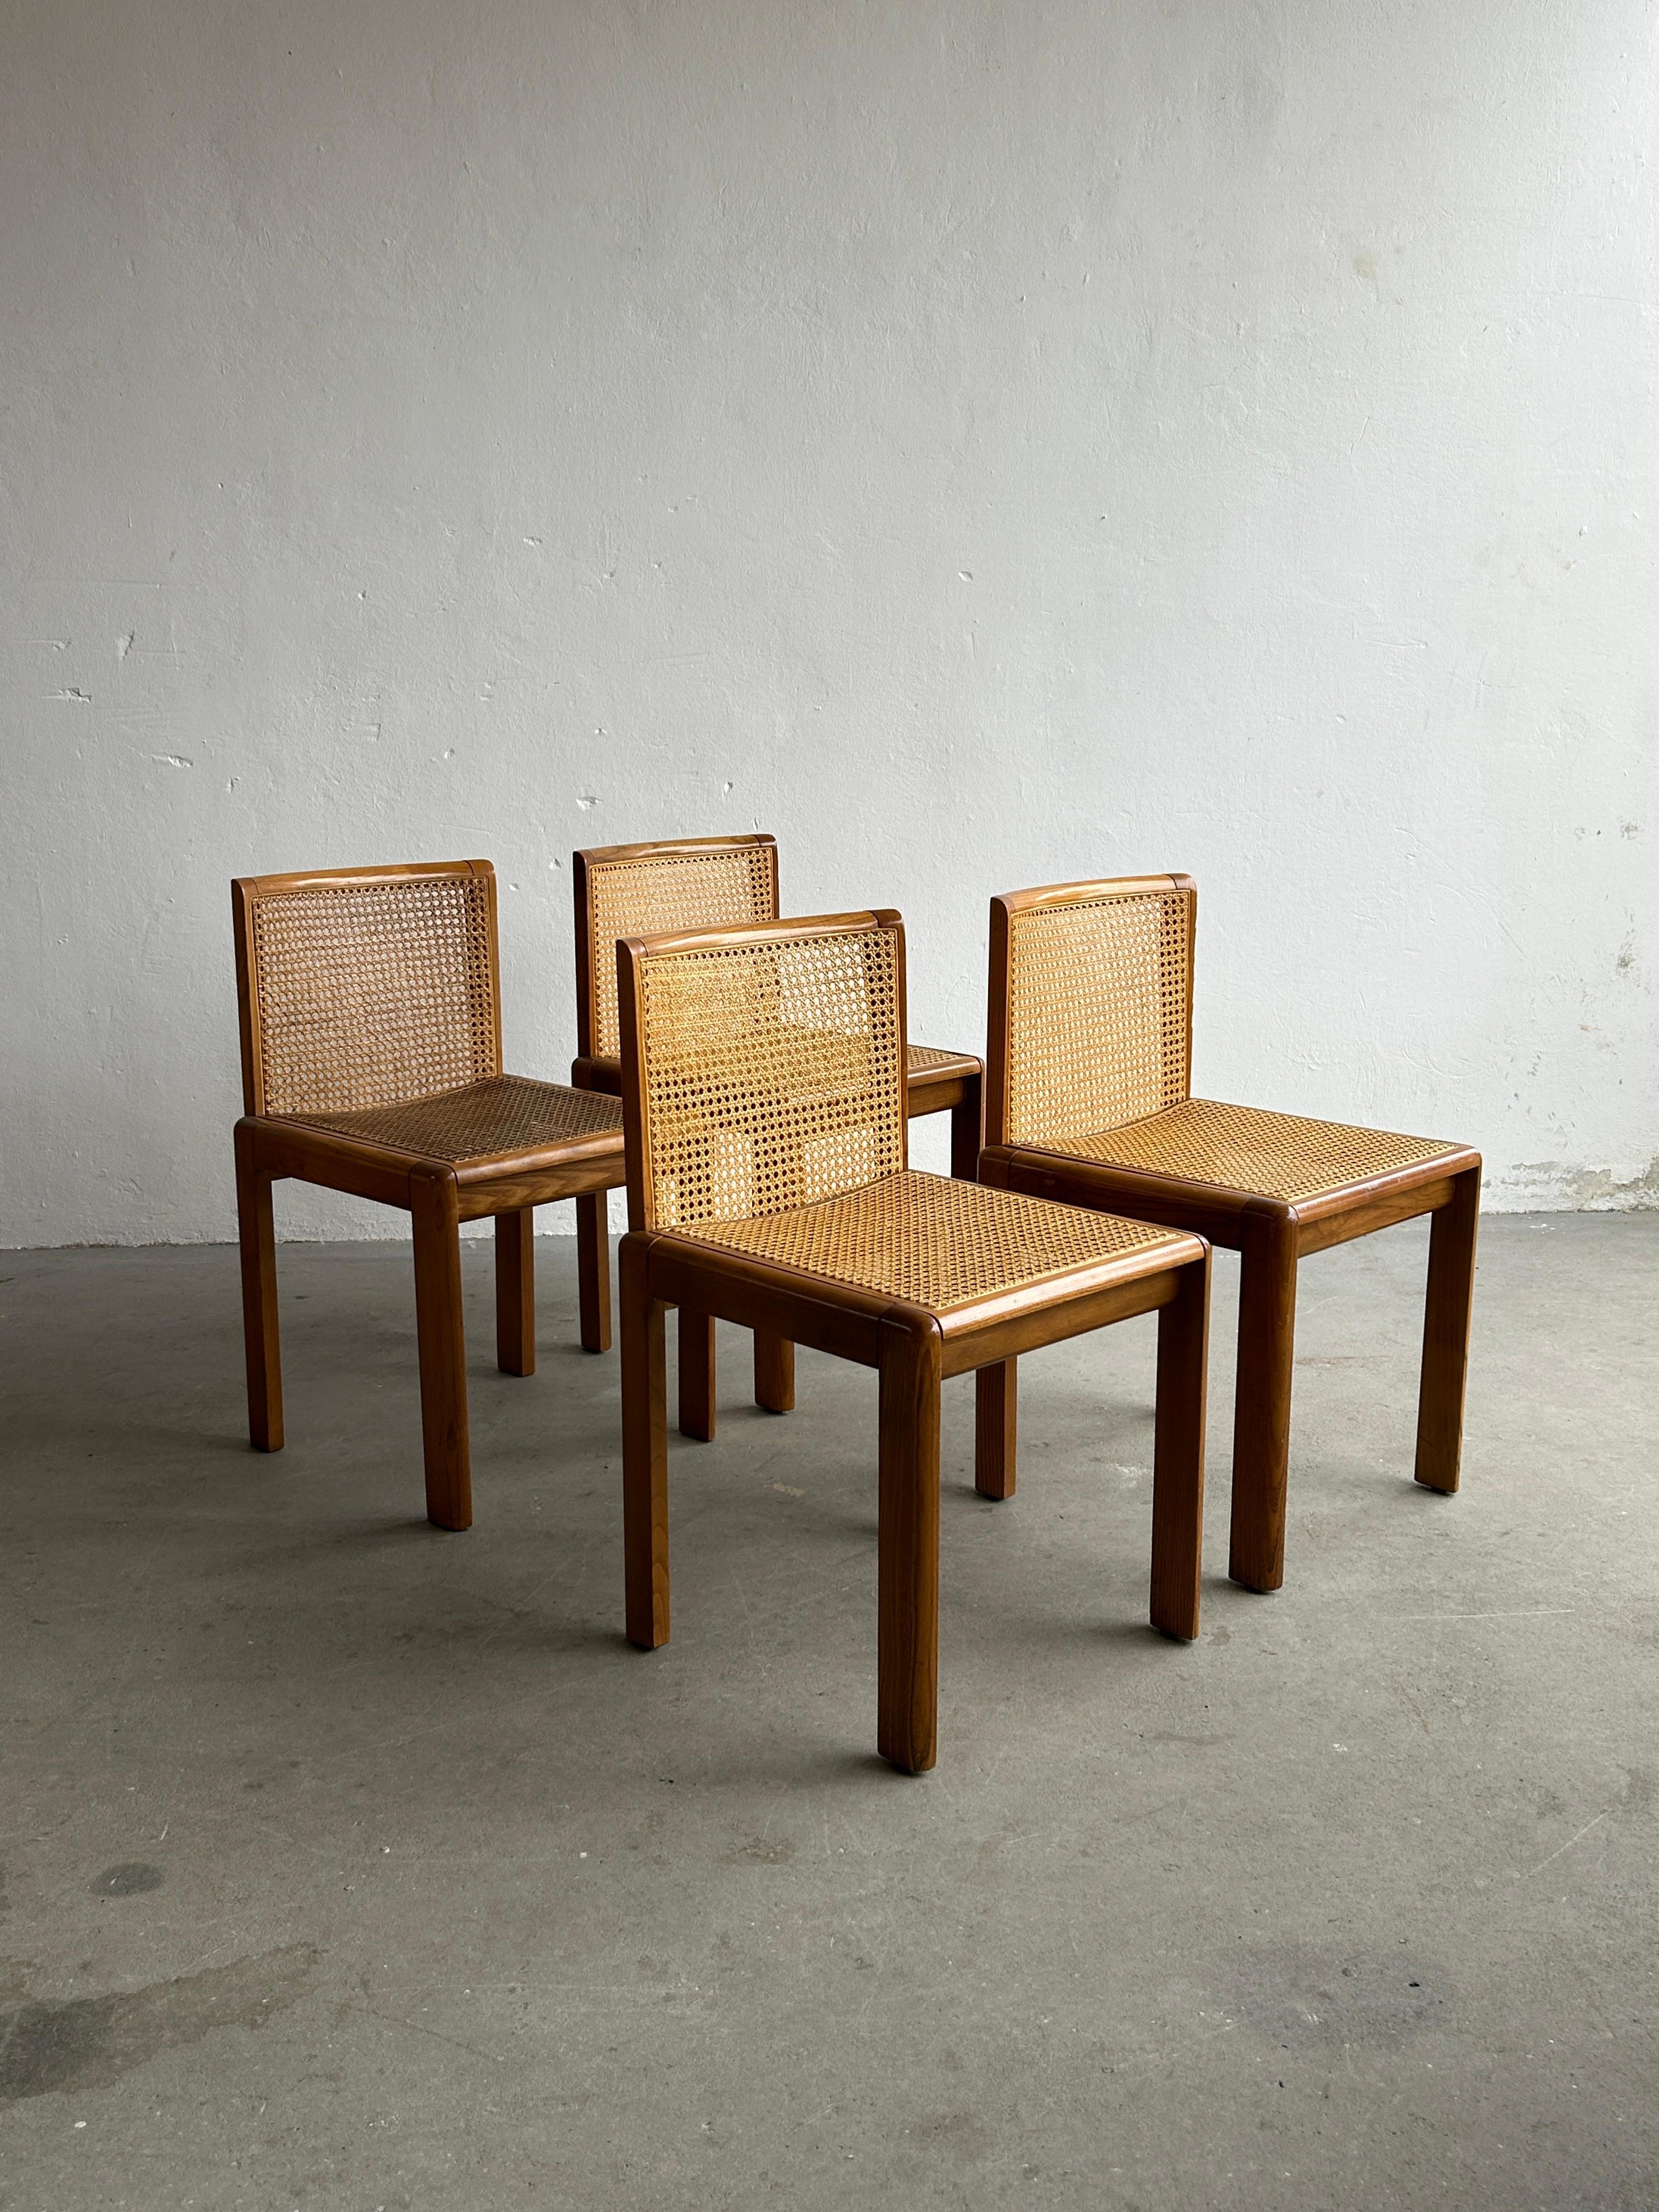 Beautiful and elegant wood and cane Mid-Century-Modern dining chairs. Italian elegant and simple chairs with a weaved cane seat and back. Would fit well in a natural soft interior with nude tones and hints or rustic modern influences.
Produced